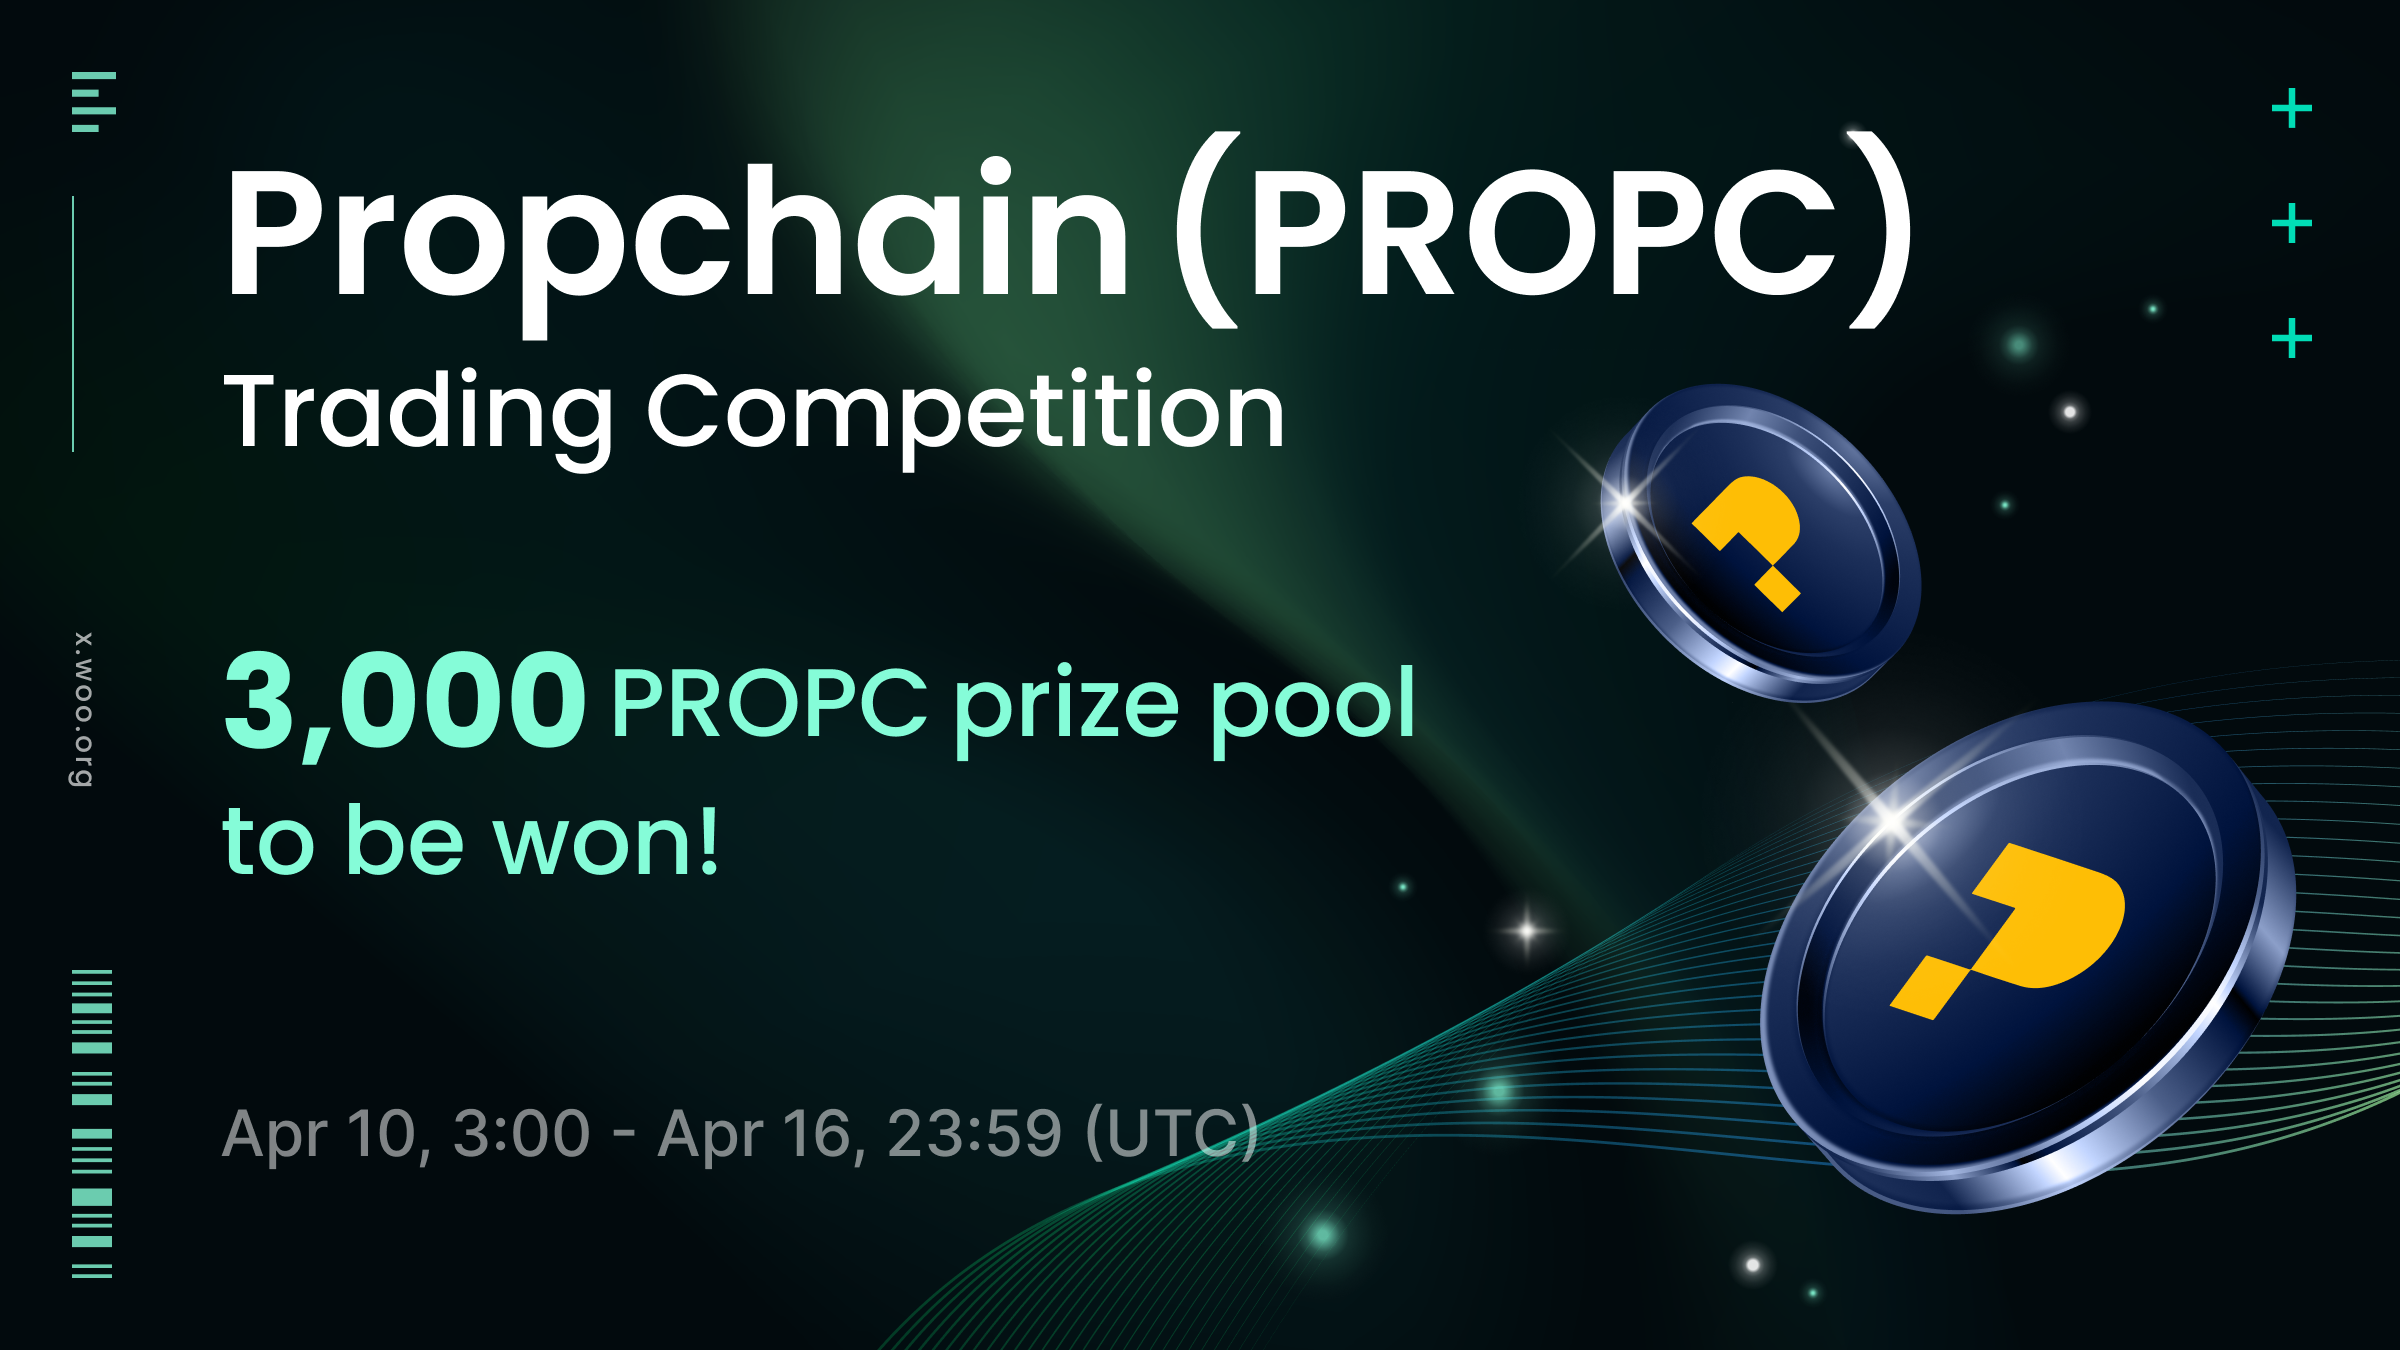 Join the PROPC trading competition and share a 3,000 PROPC prize pool!